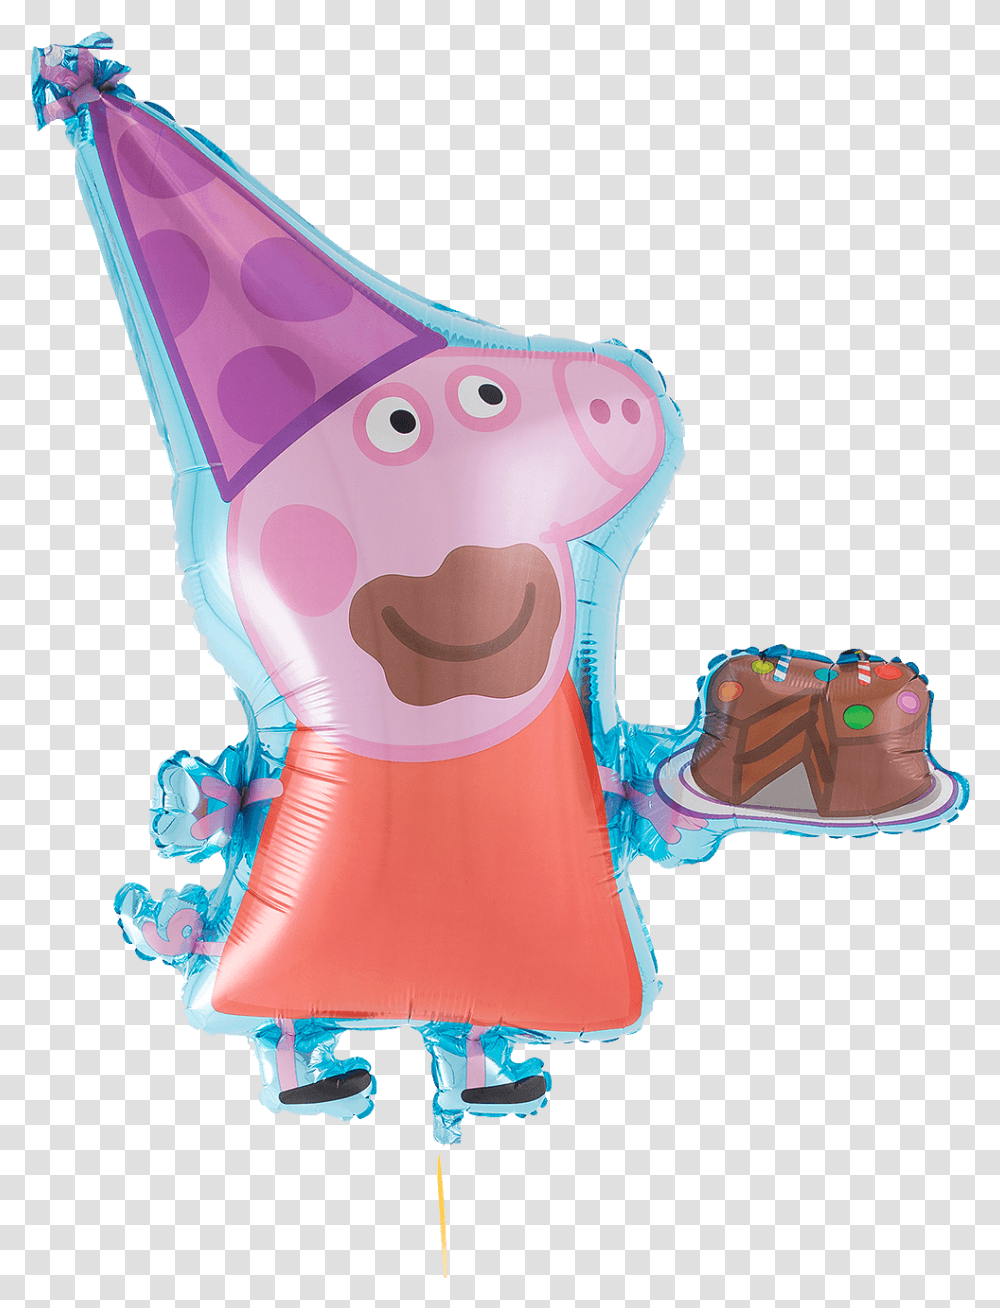 Peppa Pig Birthday Cake Supershape Cartoon, Apparel, Party Hat, Sweets Transparent Png